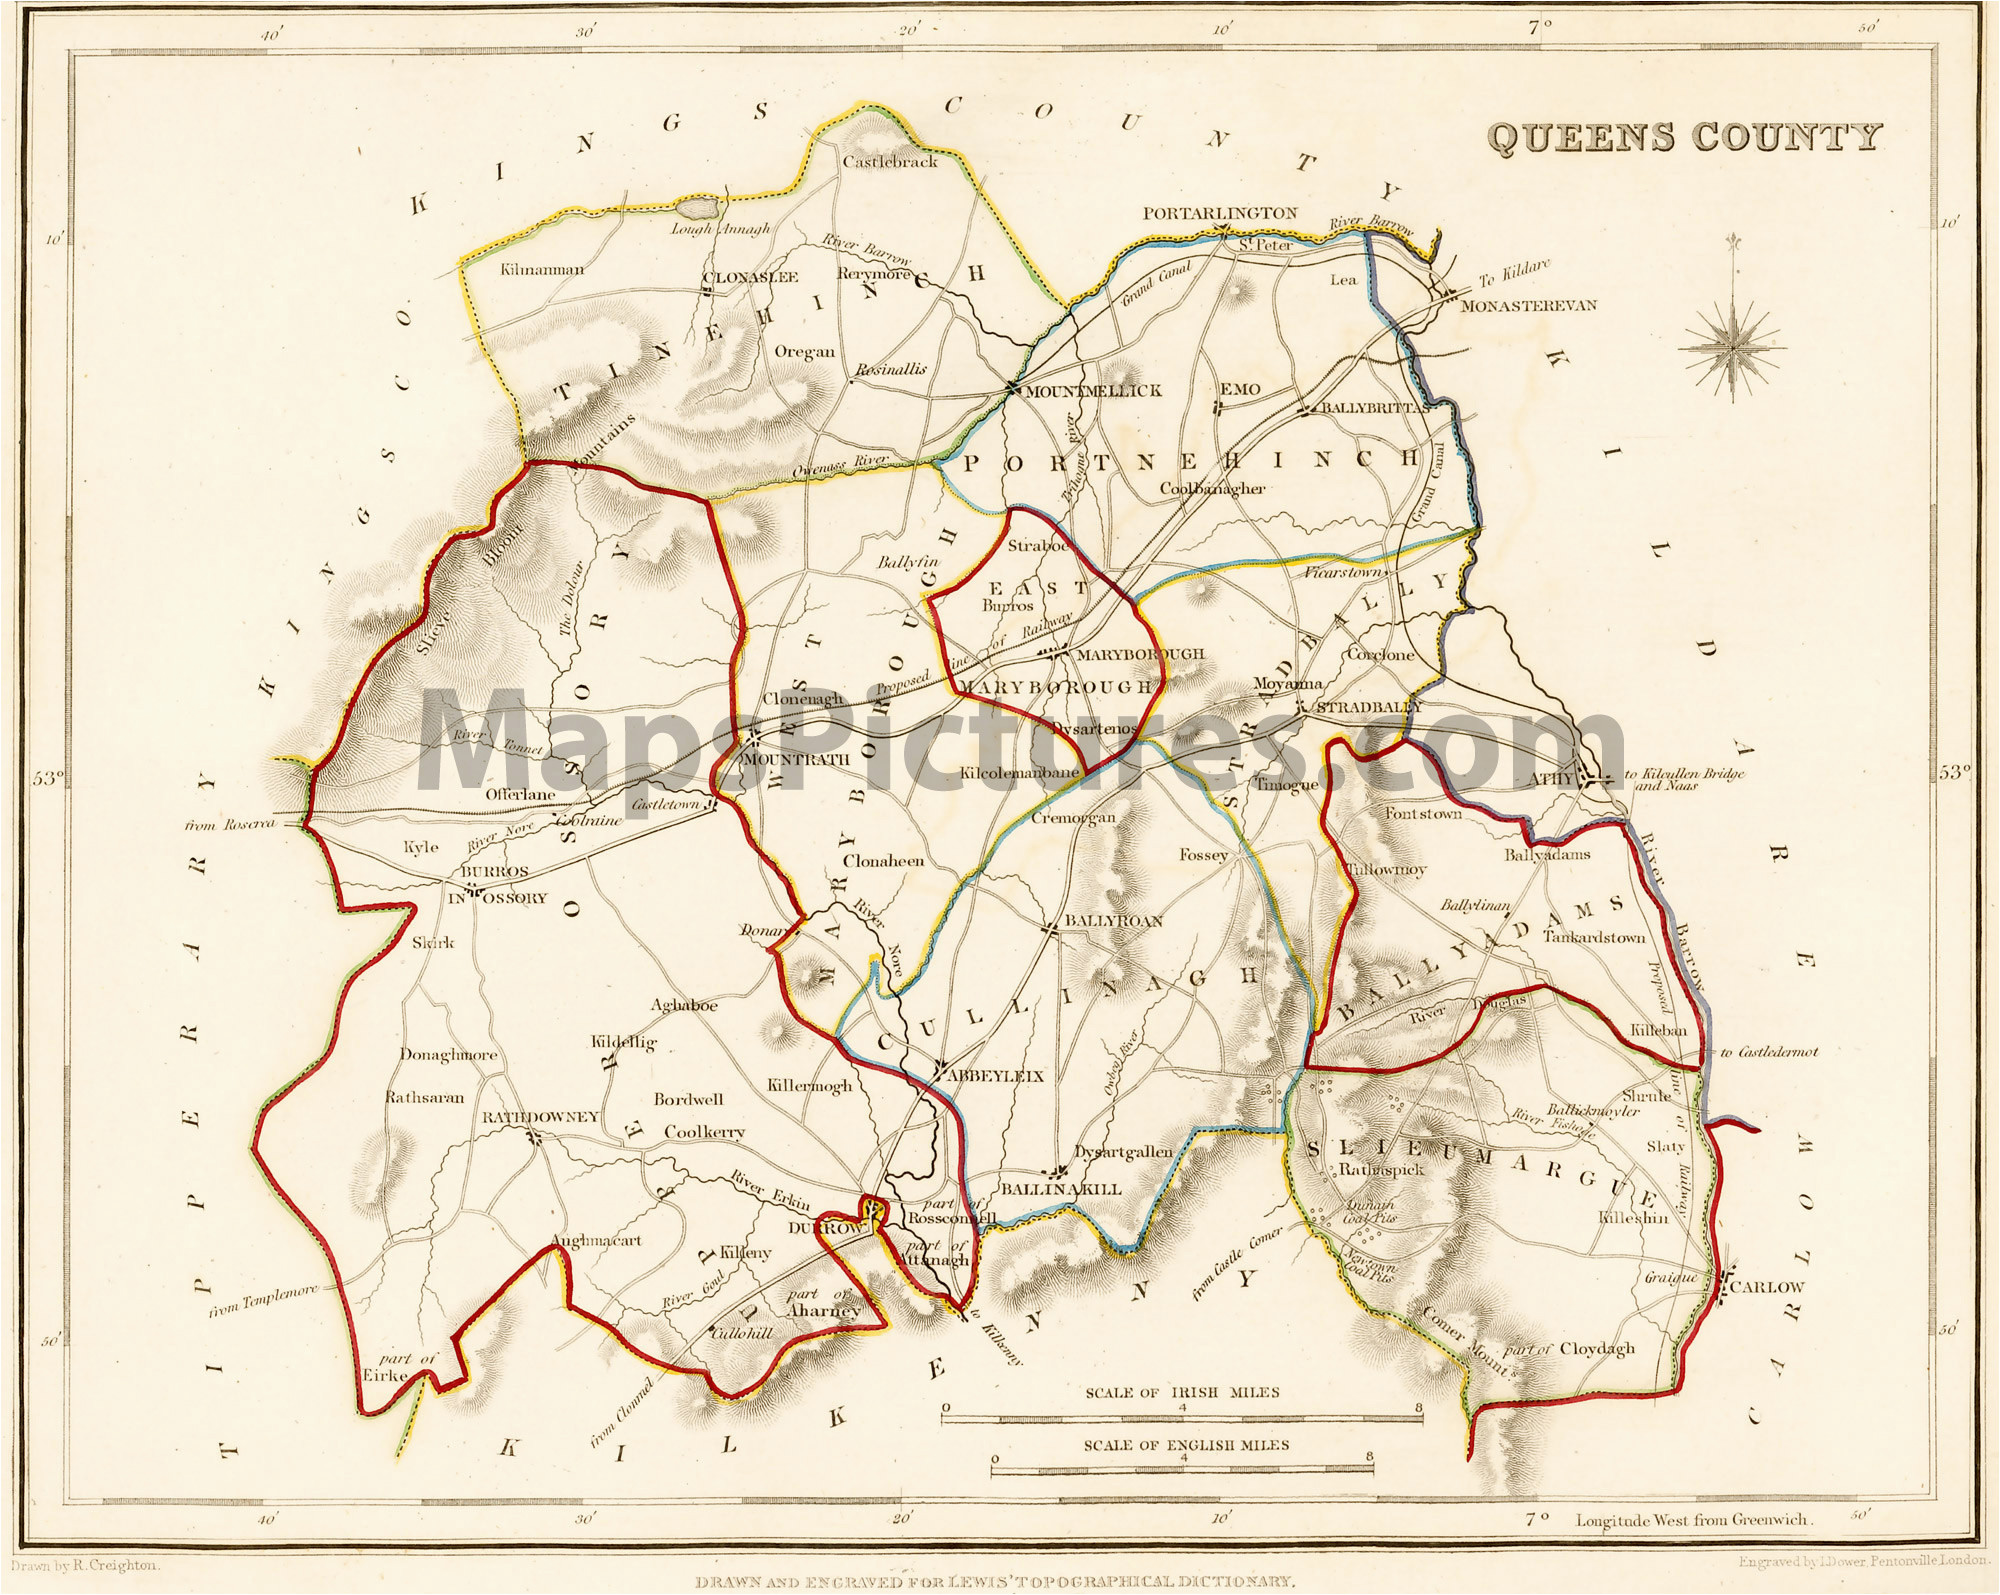 county queens county laois ireland map 1837